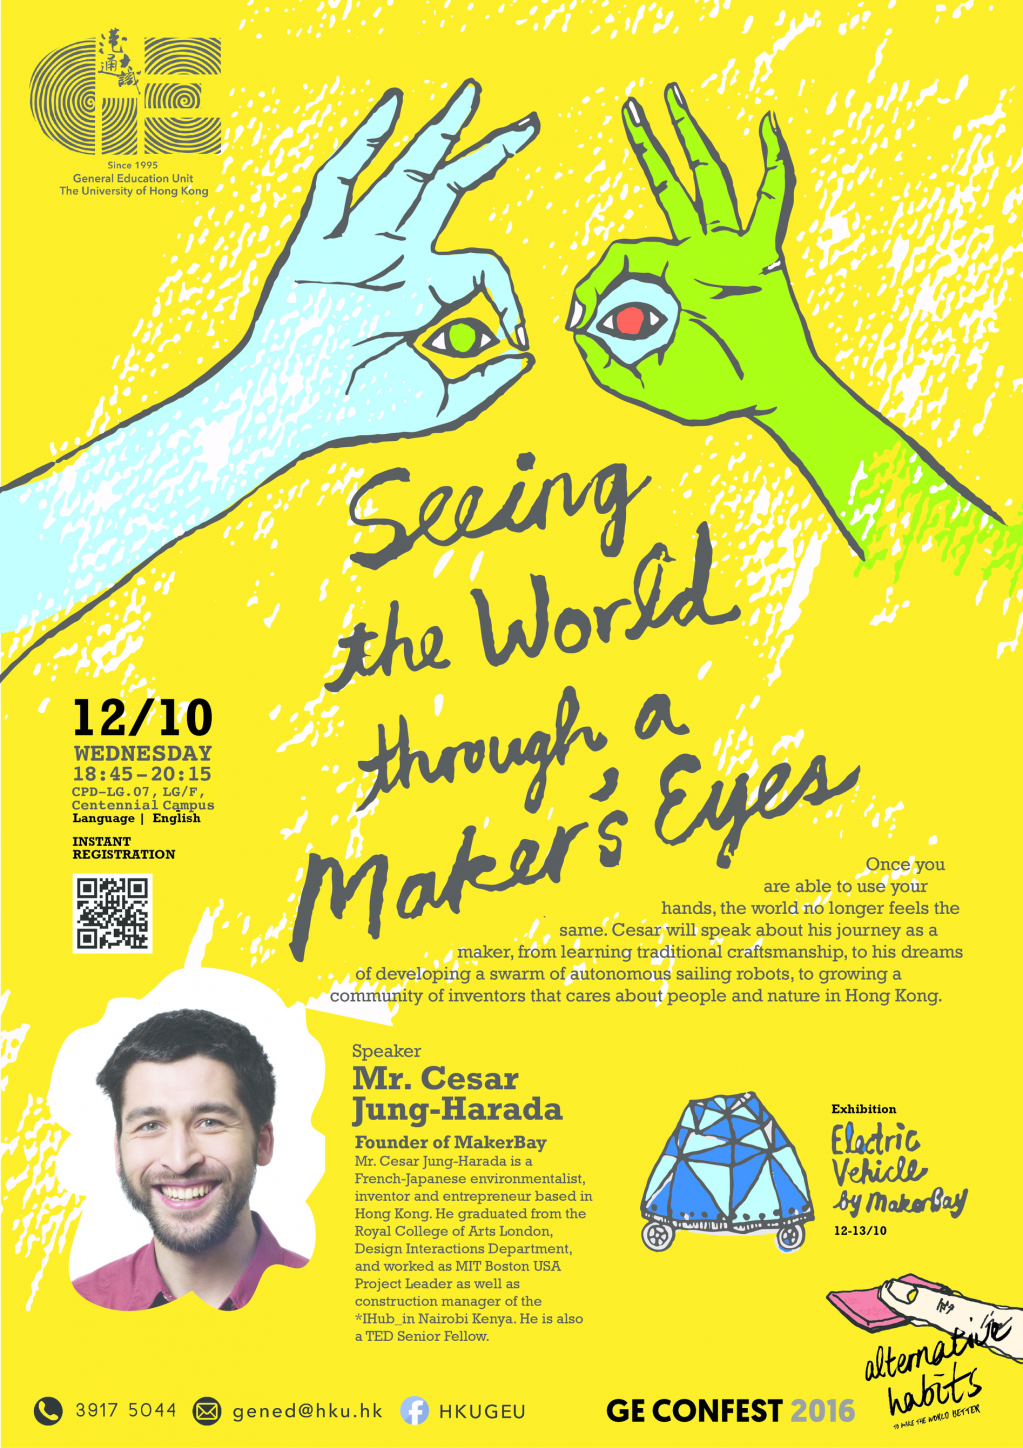 Forum: Seeing the World through a Maker's Eyes